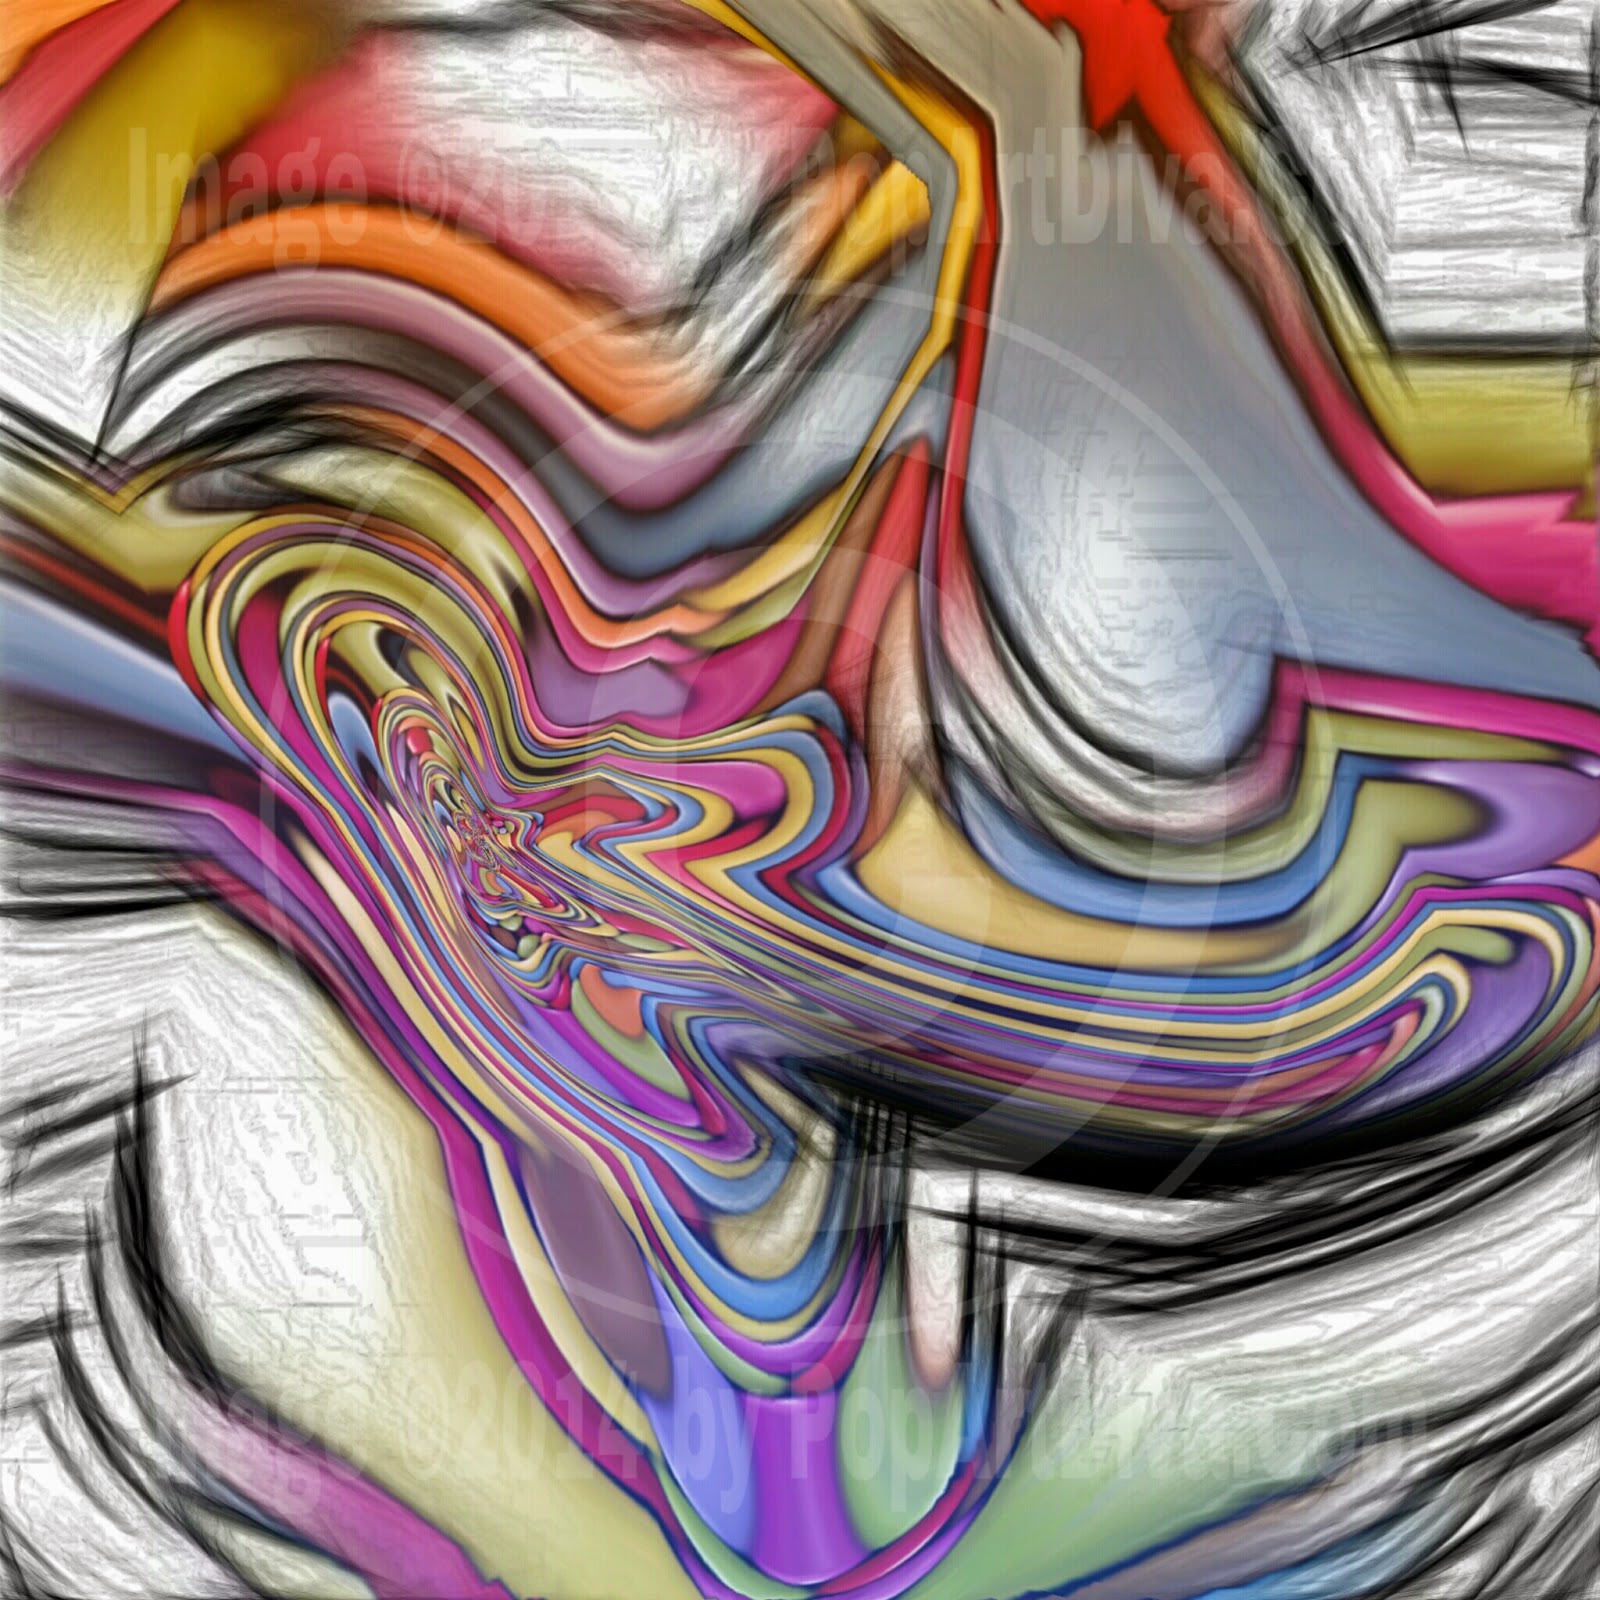 http://store.payloadz.com/details/2084838-photos-and-images-backgrounds-squished-abstract-art-web-graphic-pencilled.html 